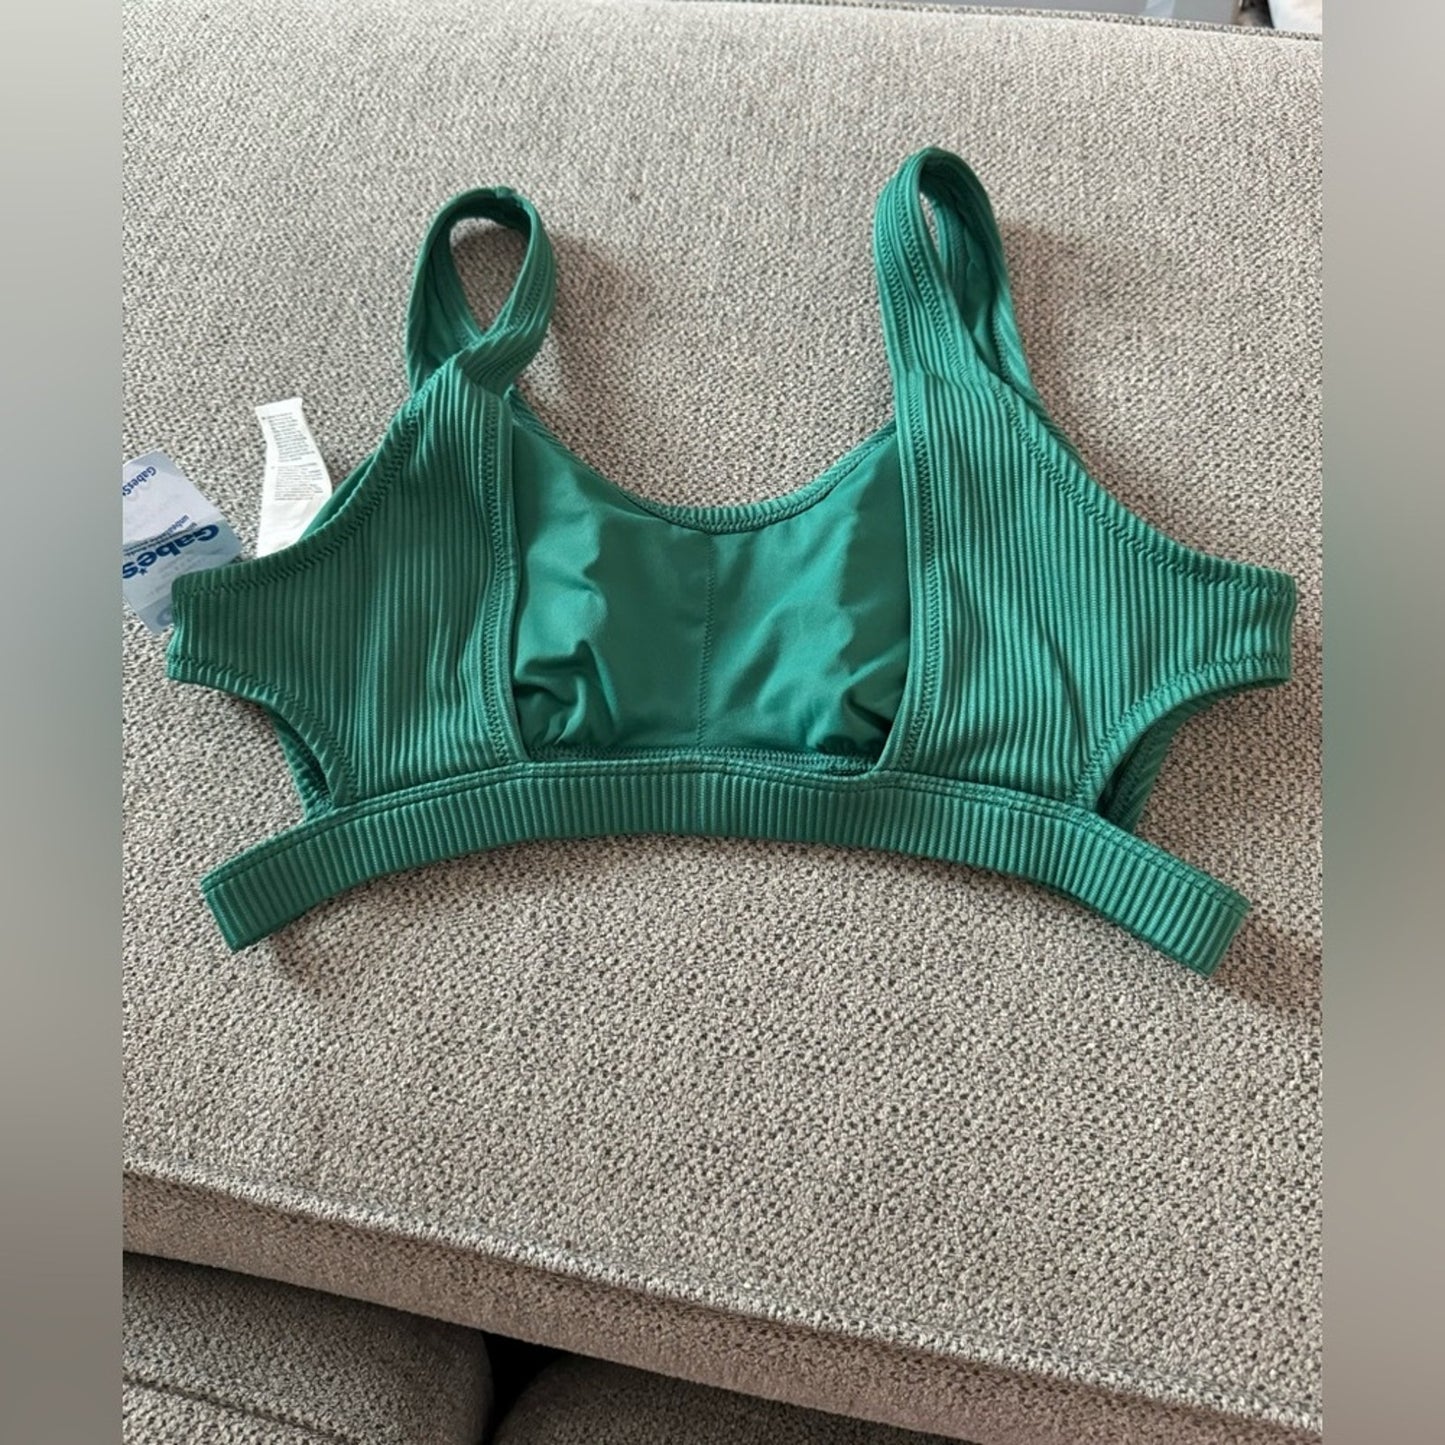 NWT LG Cupshe Green Ribbed Bathing Suit Top